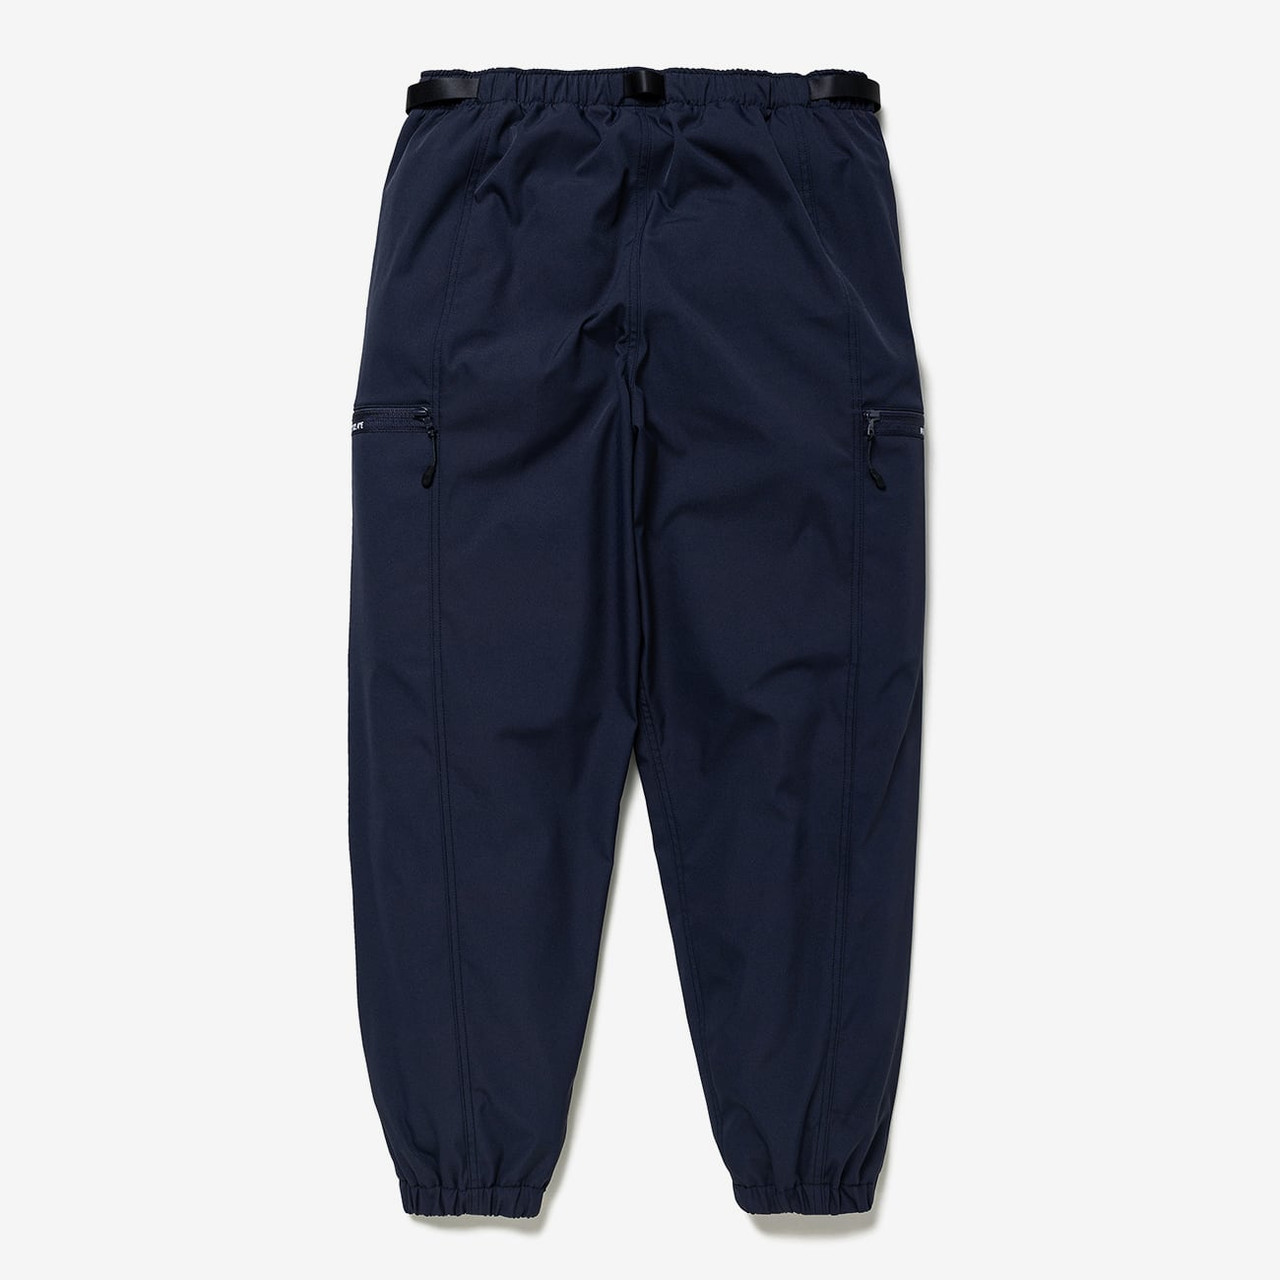 TRACKS / TROUSERS / POLY. TWILL 231BRDT-PTM02